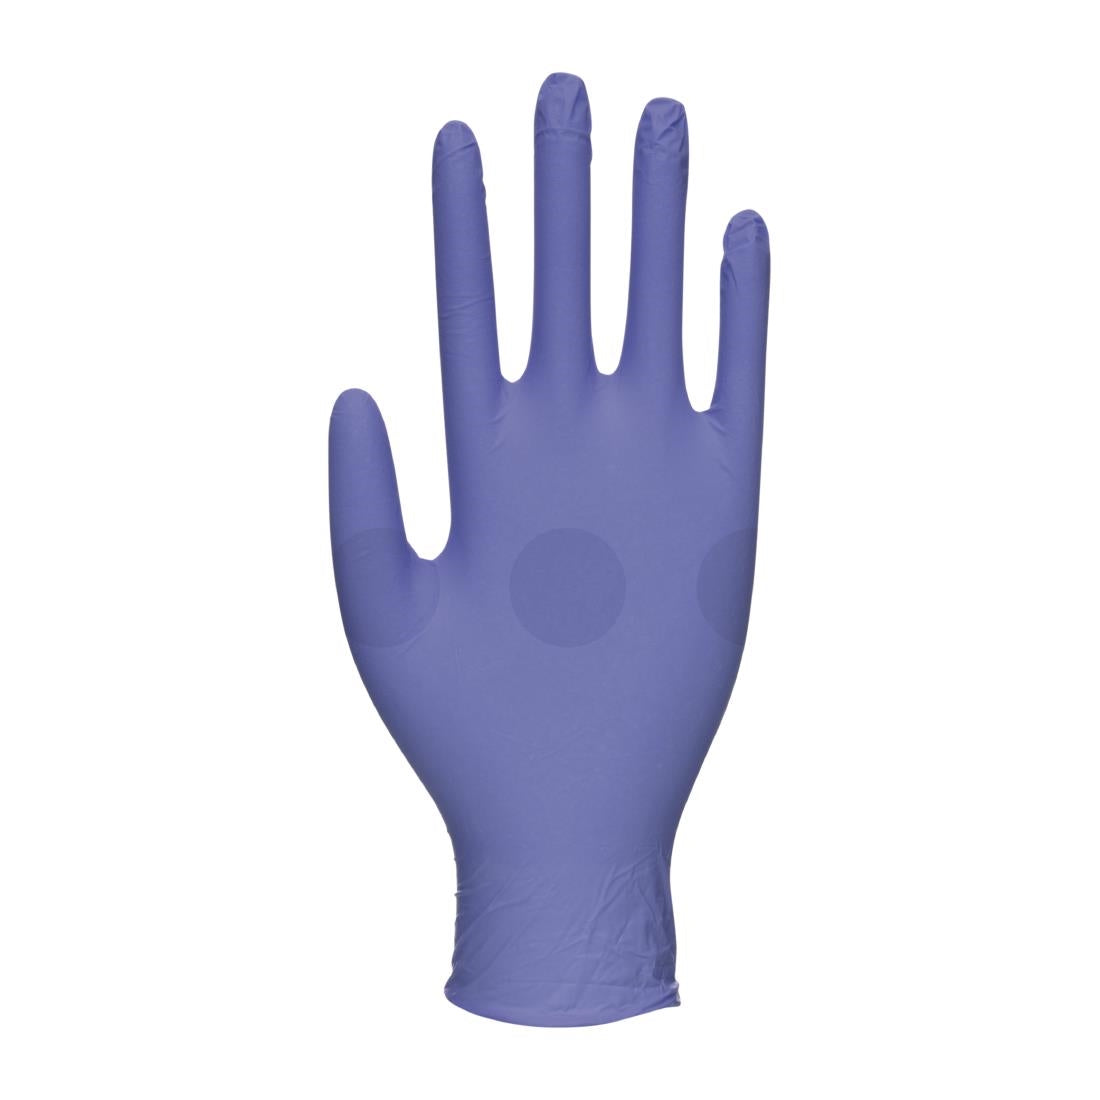 FW844-S Biotouch Single Use Glove Violet Blue Nitrile Powder Free Size Small (Pack of 100)